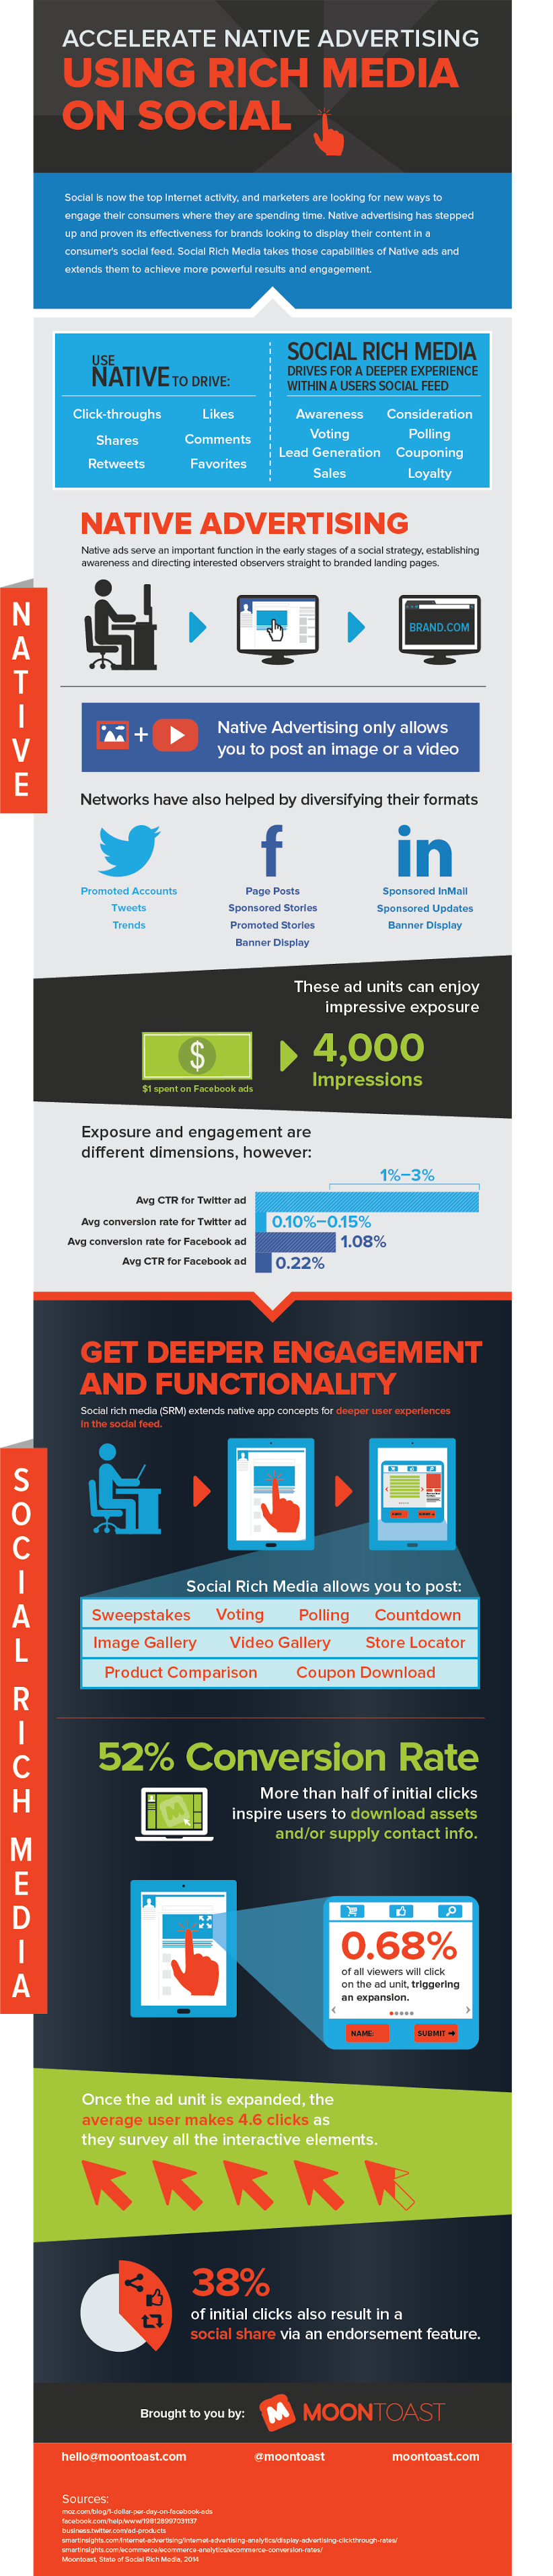 Infographic: Accelerating native advertising using rich media on Facebook - Twitter - LinkedIn